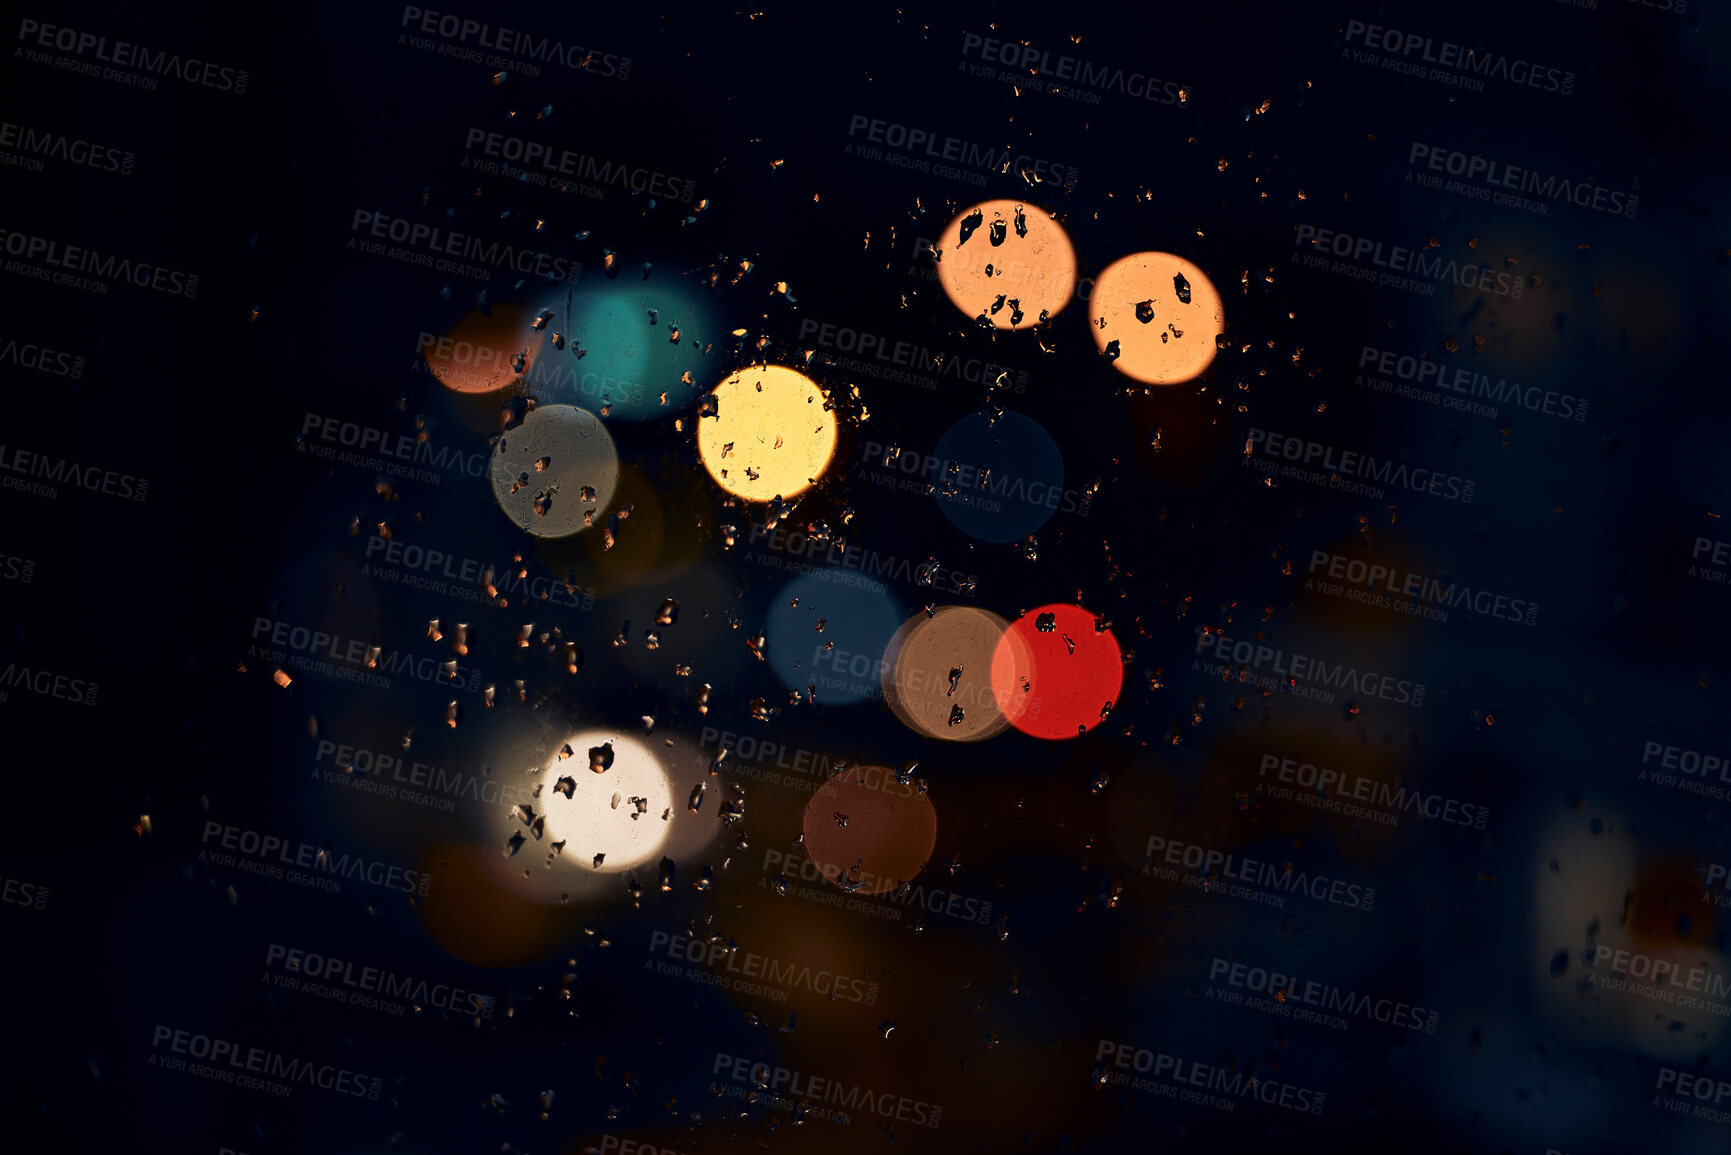 Buy stock photo Night, bokeh and lights on a window with water drops, liquid or moisture against a dark abstract background. Blurred light, colorful and rain drop or splash on glass for city view during rainy season